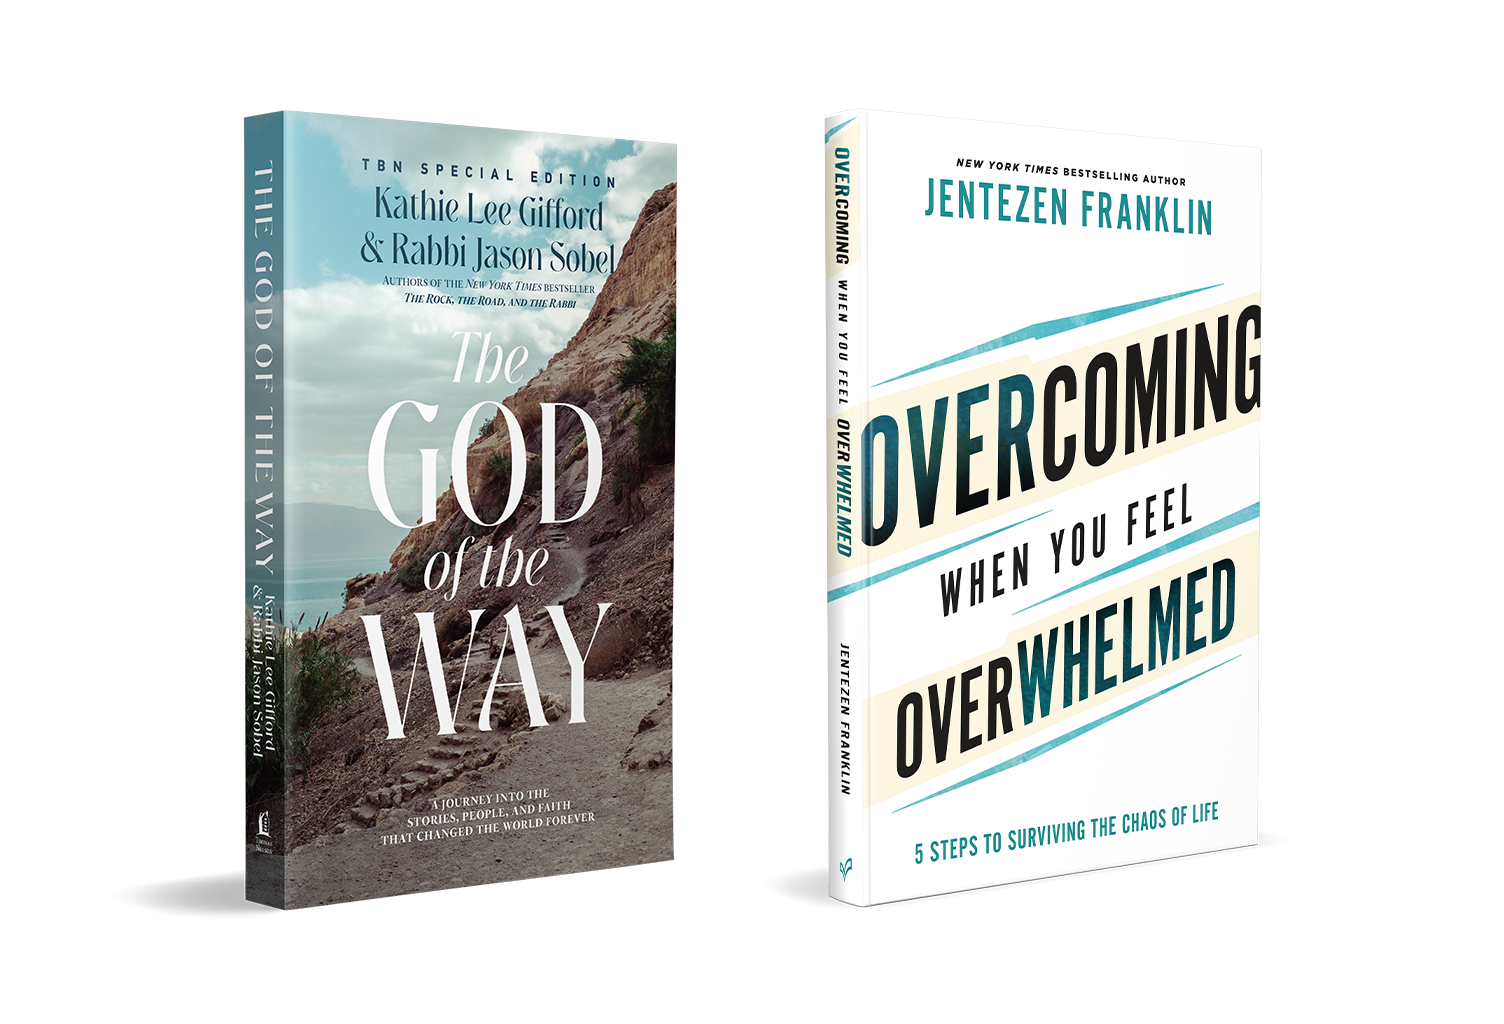 The God of the Way by Kathie Lee Gifford and Rabbi Jason Sobel and Overcoming When You Feel Overwhelmed by Pastor Jentezen Franklin on TBN